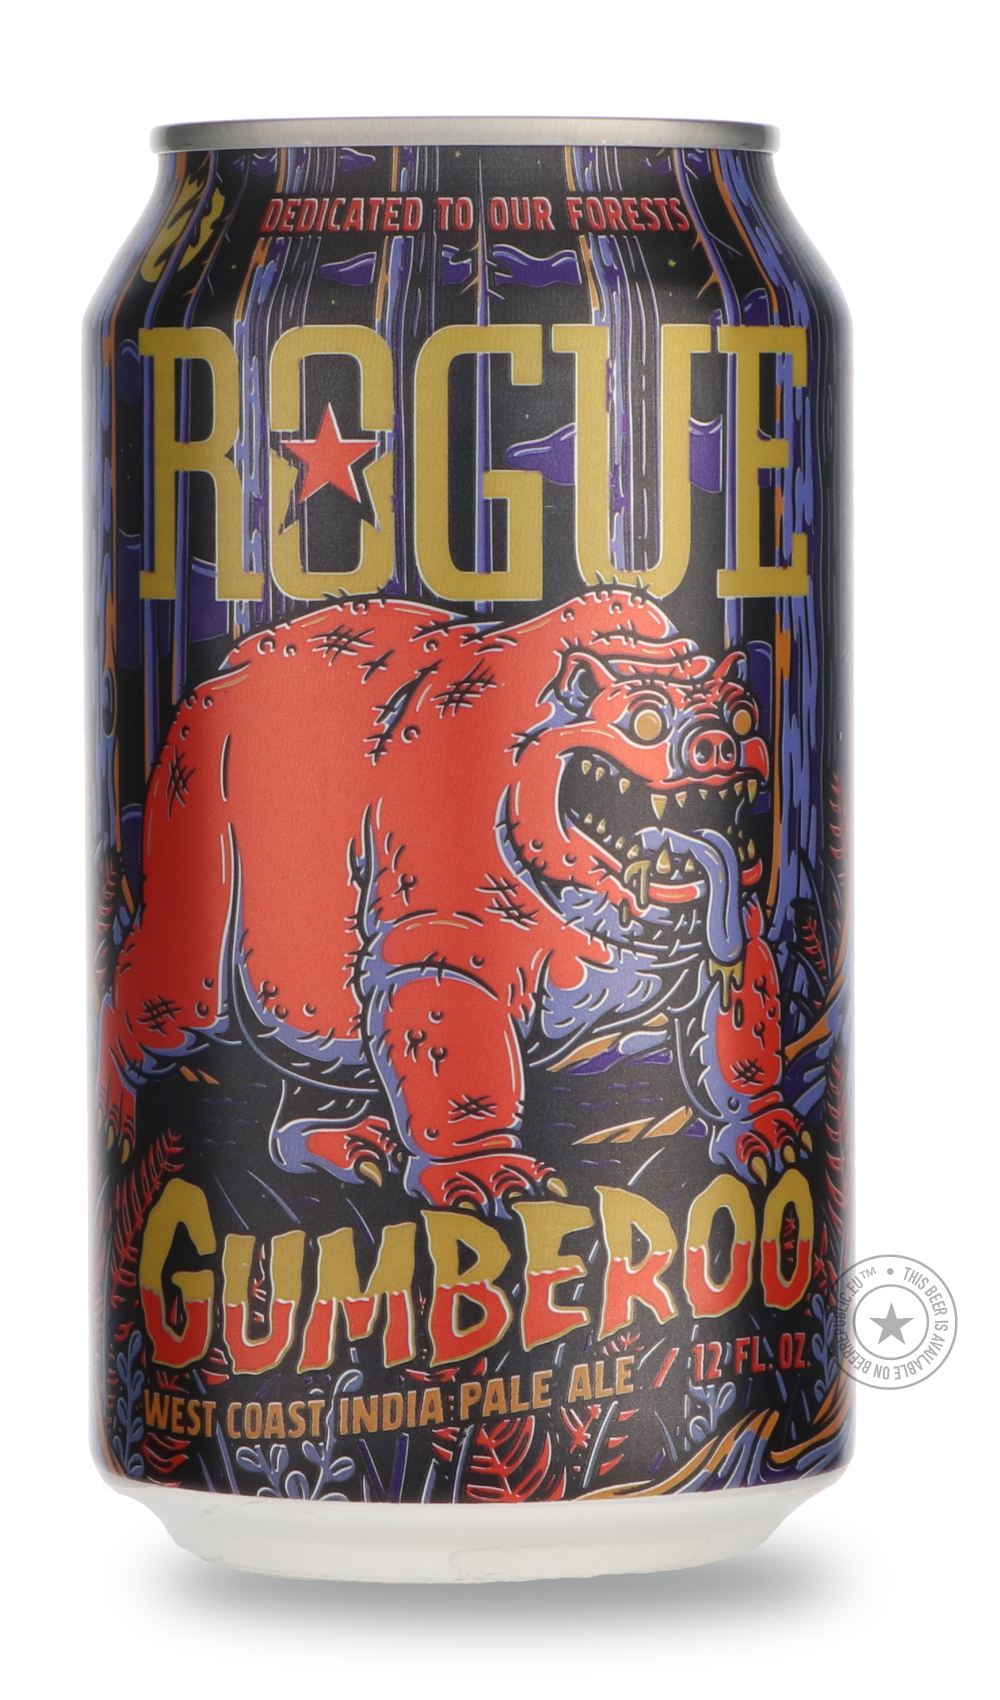 -Rogue- Gumberoo-IPA- Only @ Beer Republic - The best online beer store for American & Canadian craft beer - Buy beer online from the USA and Canada - Bier online kopen - Amerikaans bier kopen - Craft beer store - Craft beer kopen - Amerikanisch bier kaufen - Bier online kaufen - Acheter biere online - IPA - Stout - Porter - New England IPA - Hazy IPA - Imperial Stout - Barrel Aged - Barrel Aged Imperial Stout - Brown - Dark beer - Blond - Blonde - Pilsner - Lager - Wheat - Weizen - Amber - Barley Wine - Qu